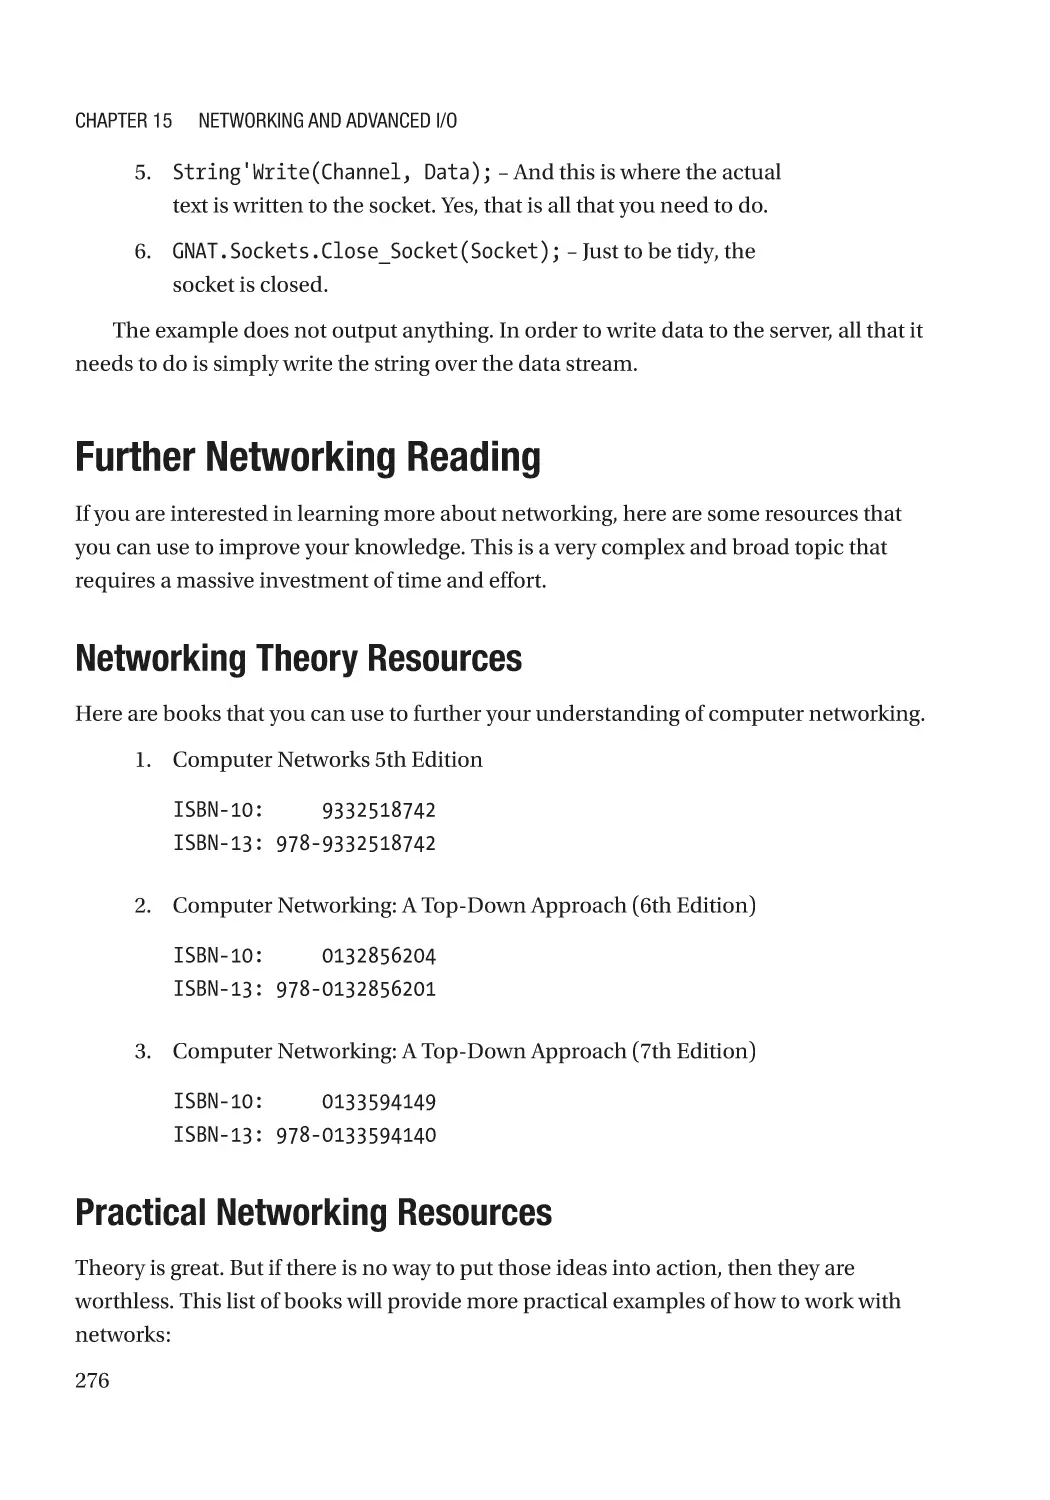 Further Networking Reading
Networking Theory Resources
Practical Networking Resources